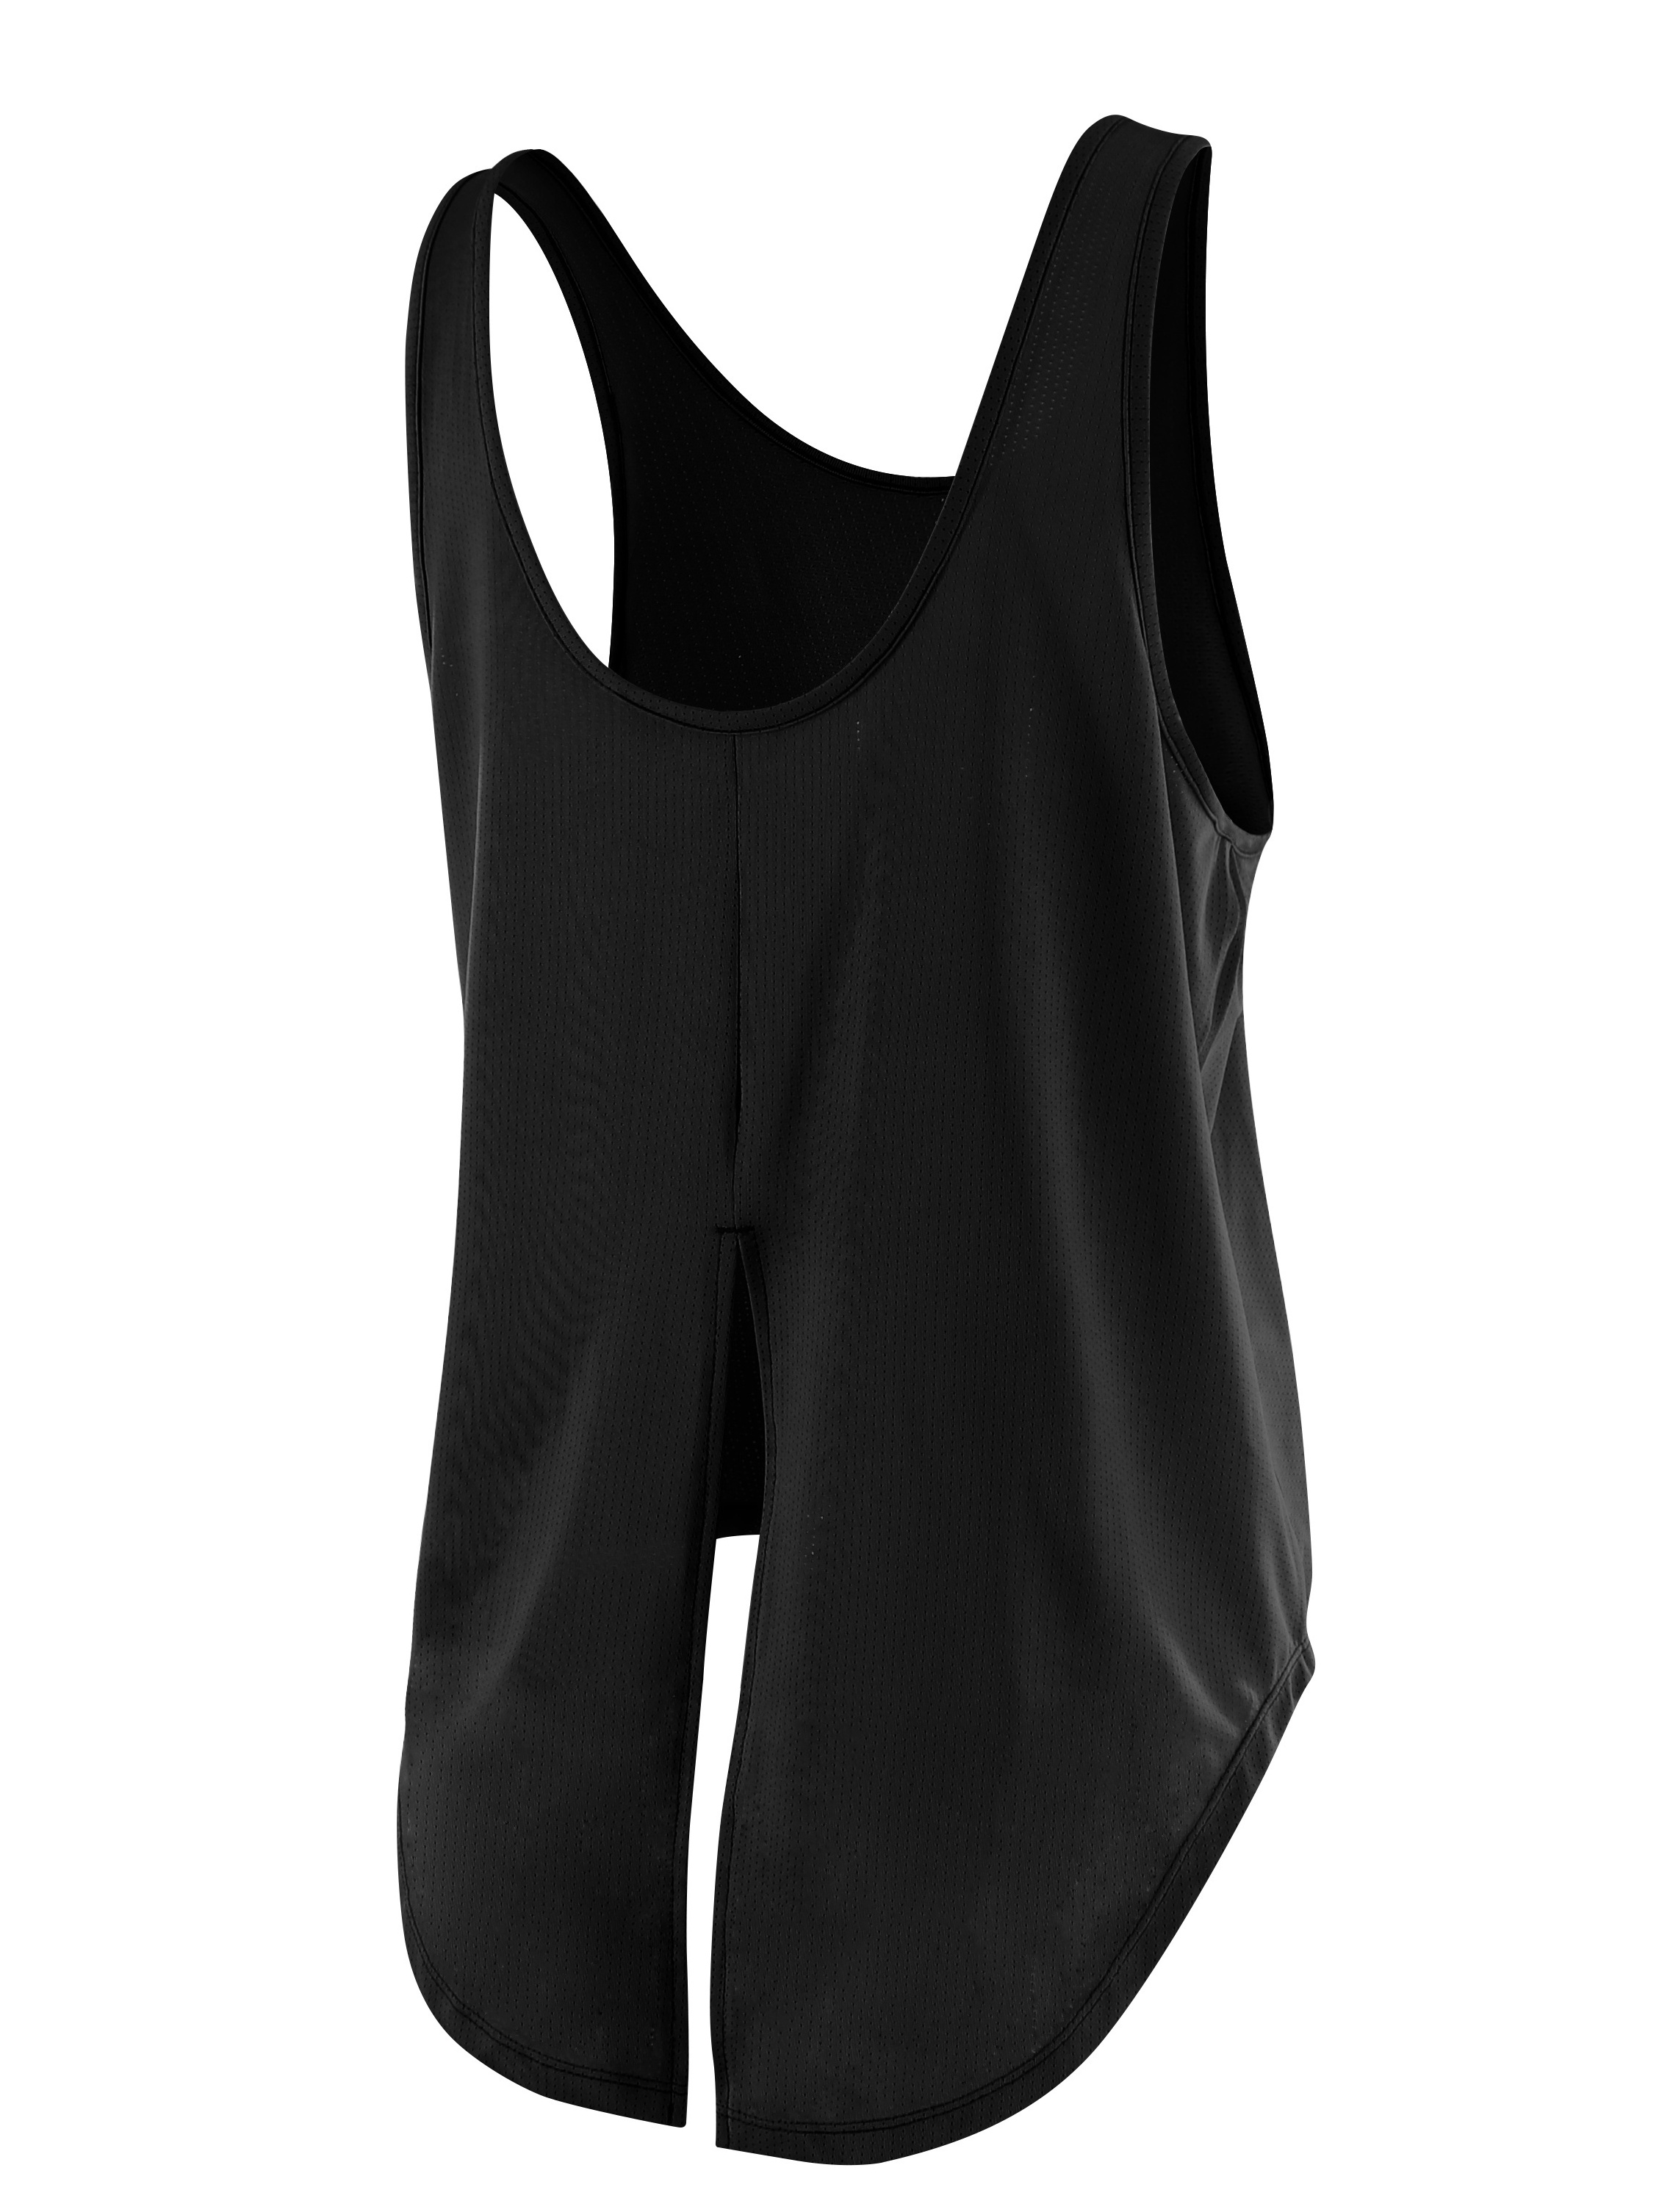 Women's Sleeveless Yoga Workout Tank Tops Scoop Neck Loose Fit Back Tie  Knot Running Exercise T-Shirt Activewear